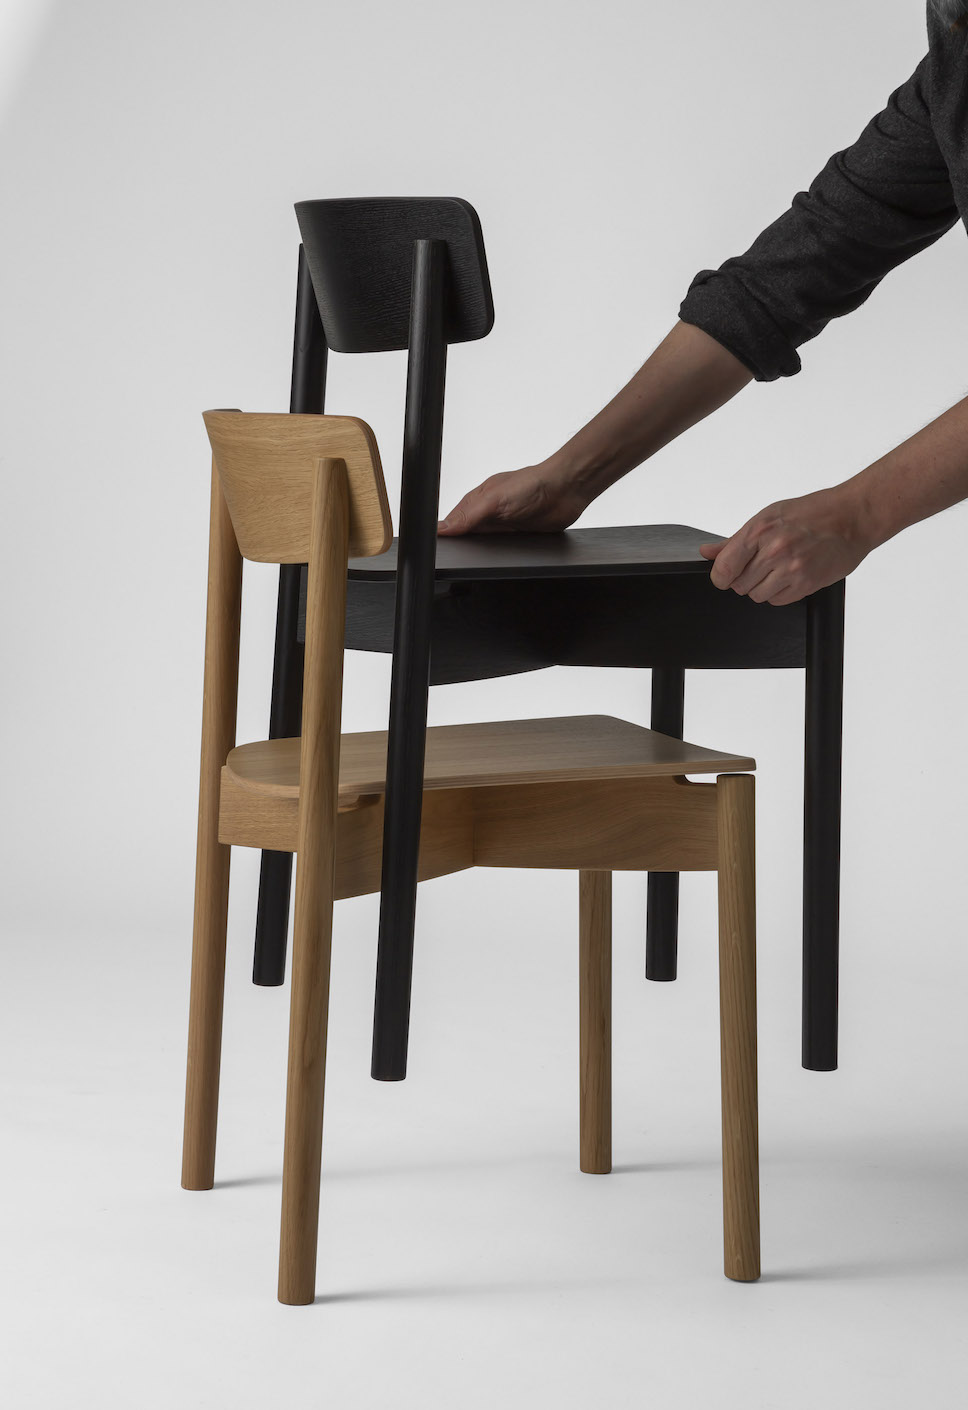 Demonstrating the stackable ability of the Cross Chair